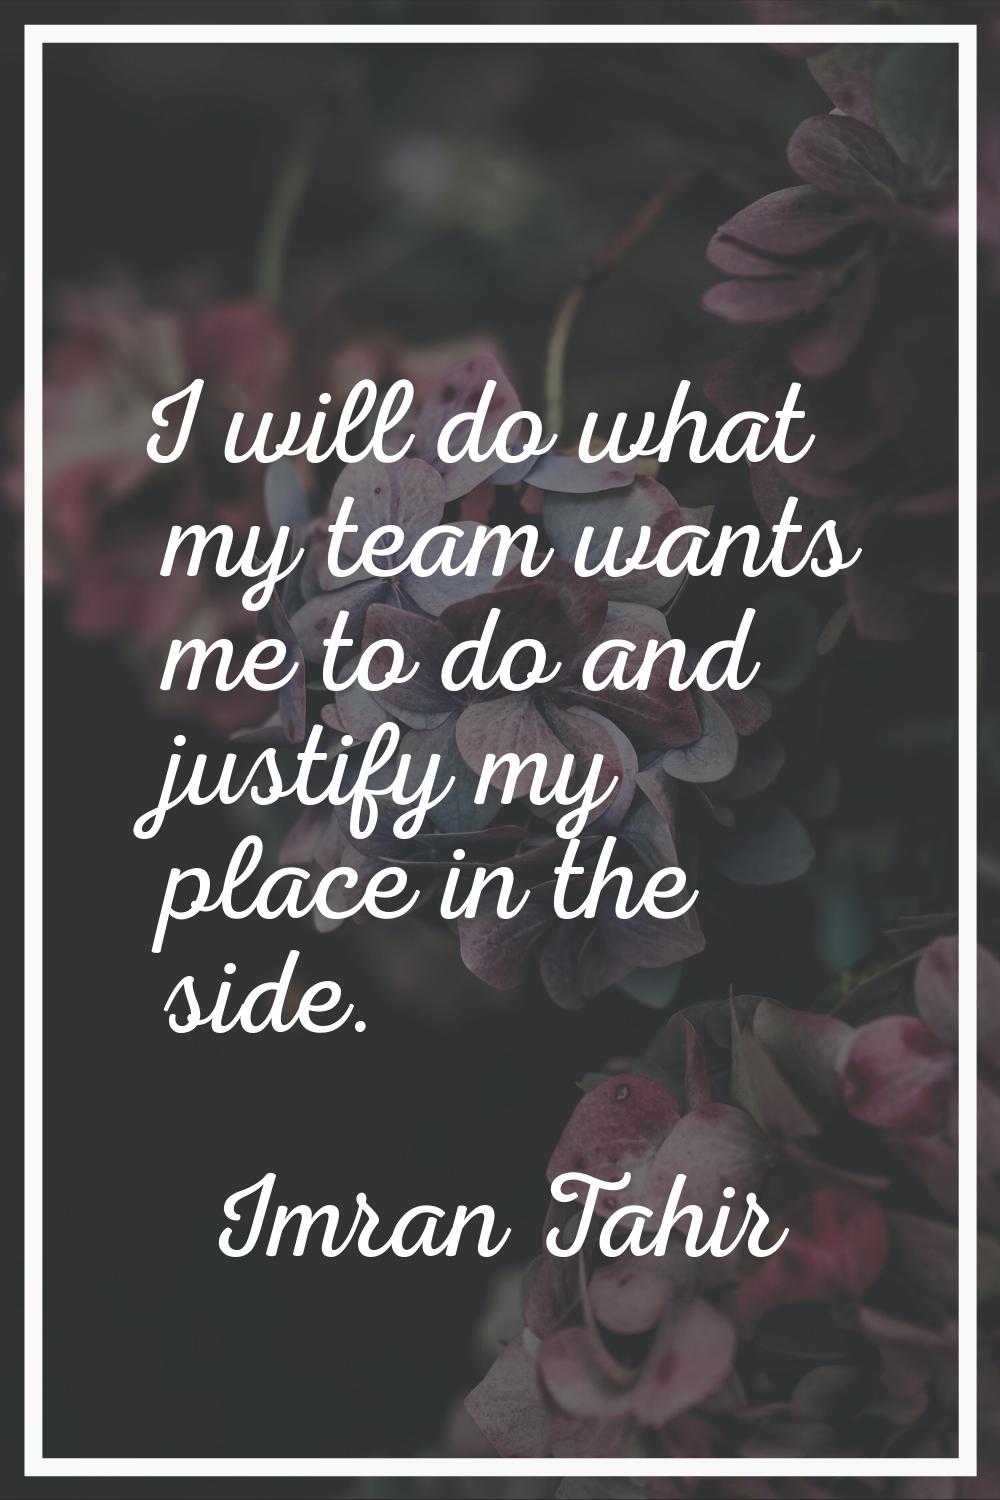 I will do what my team wants me to do and justify my place in the side.